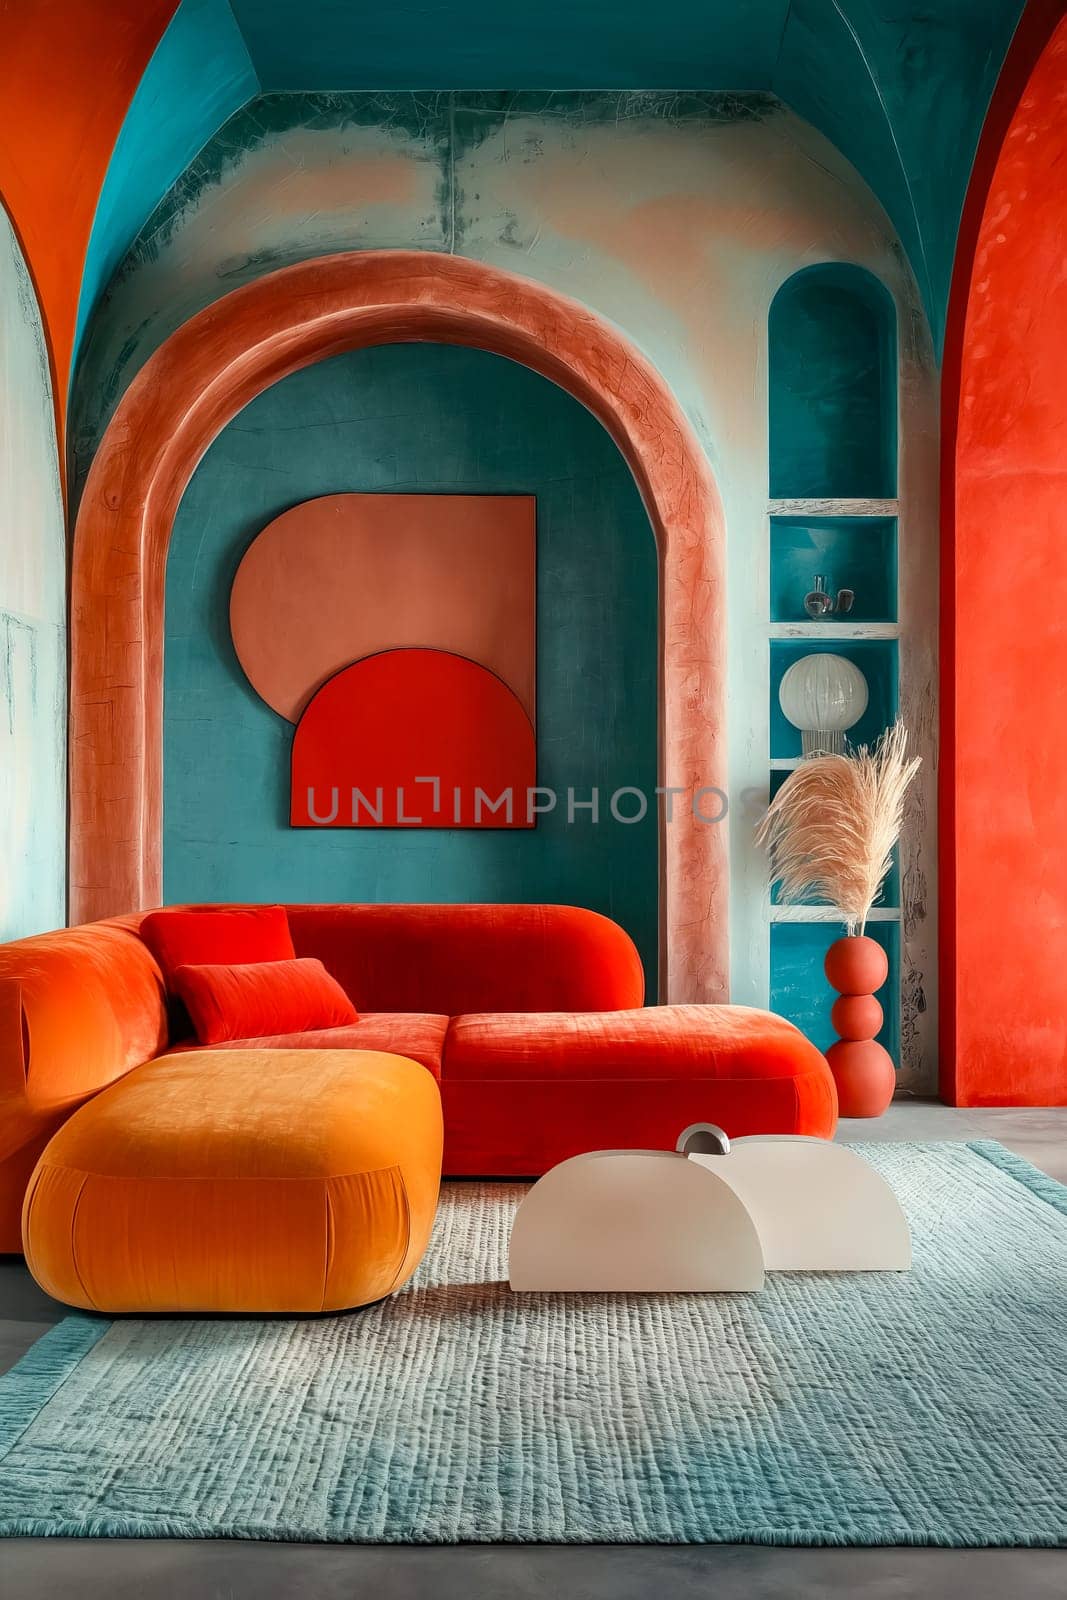 A living room with a red couch and orange pillows. The couch is made of a soft material and is placed in the center of the room. There is a white coffee table in front of the couch. Generative AI